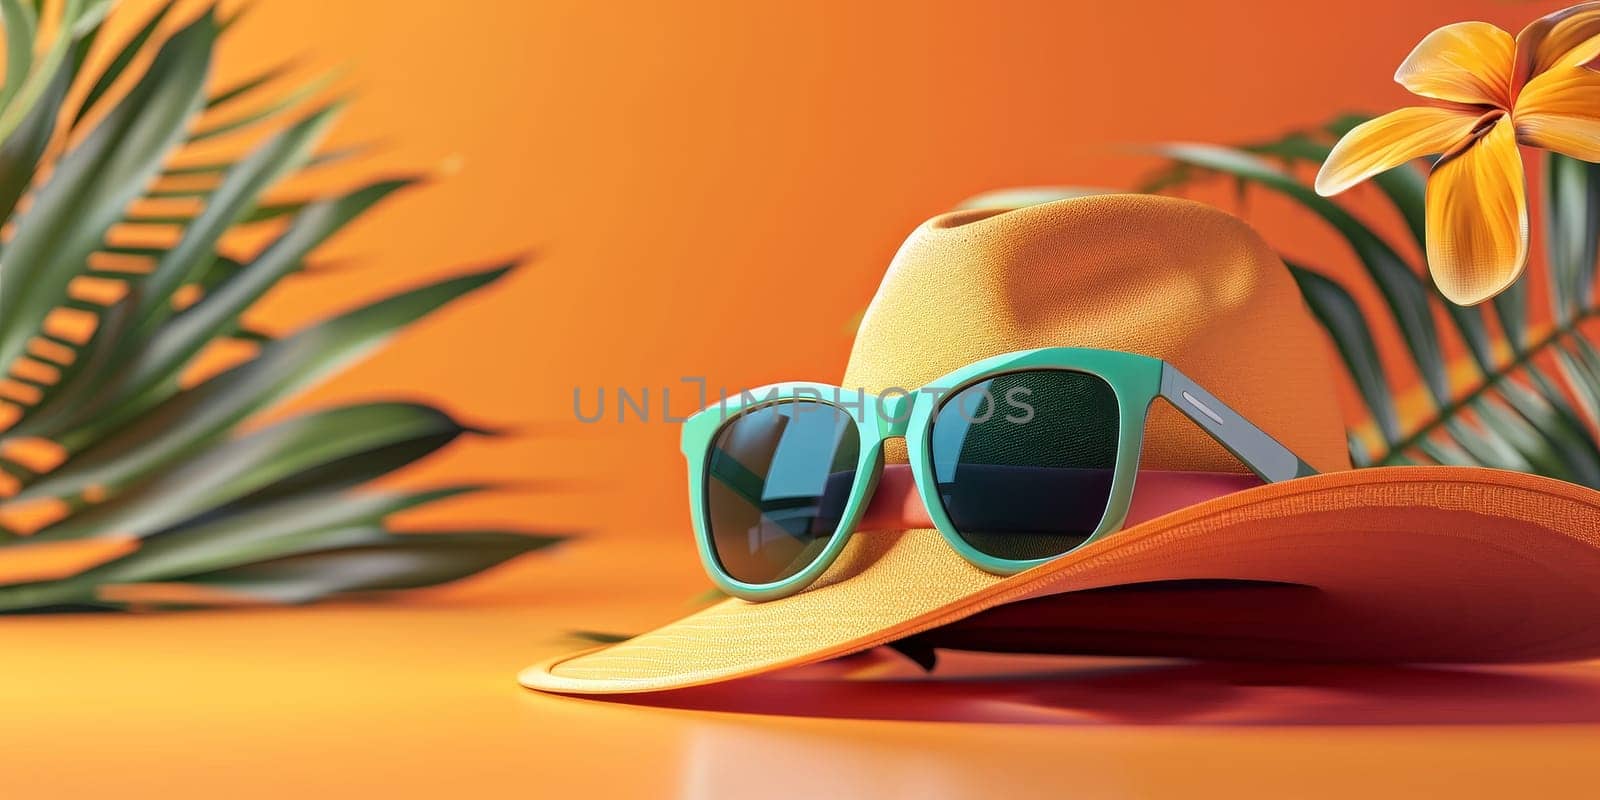 A hat and sunglasses are on a table in front of a leafy green background by nateemee